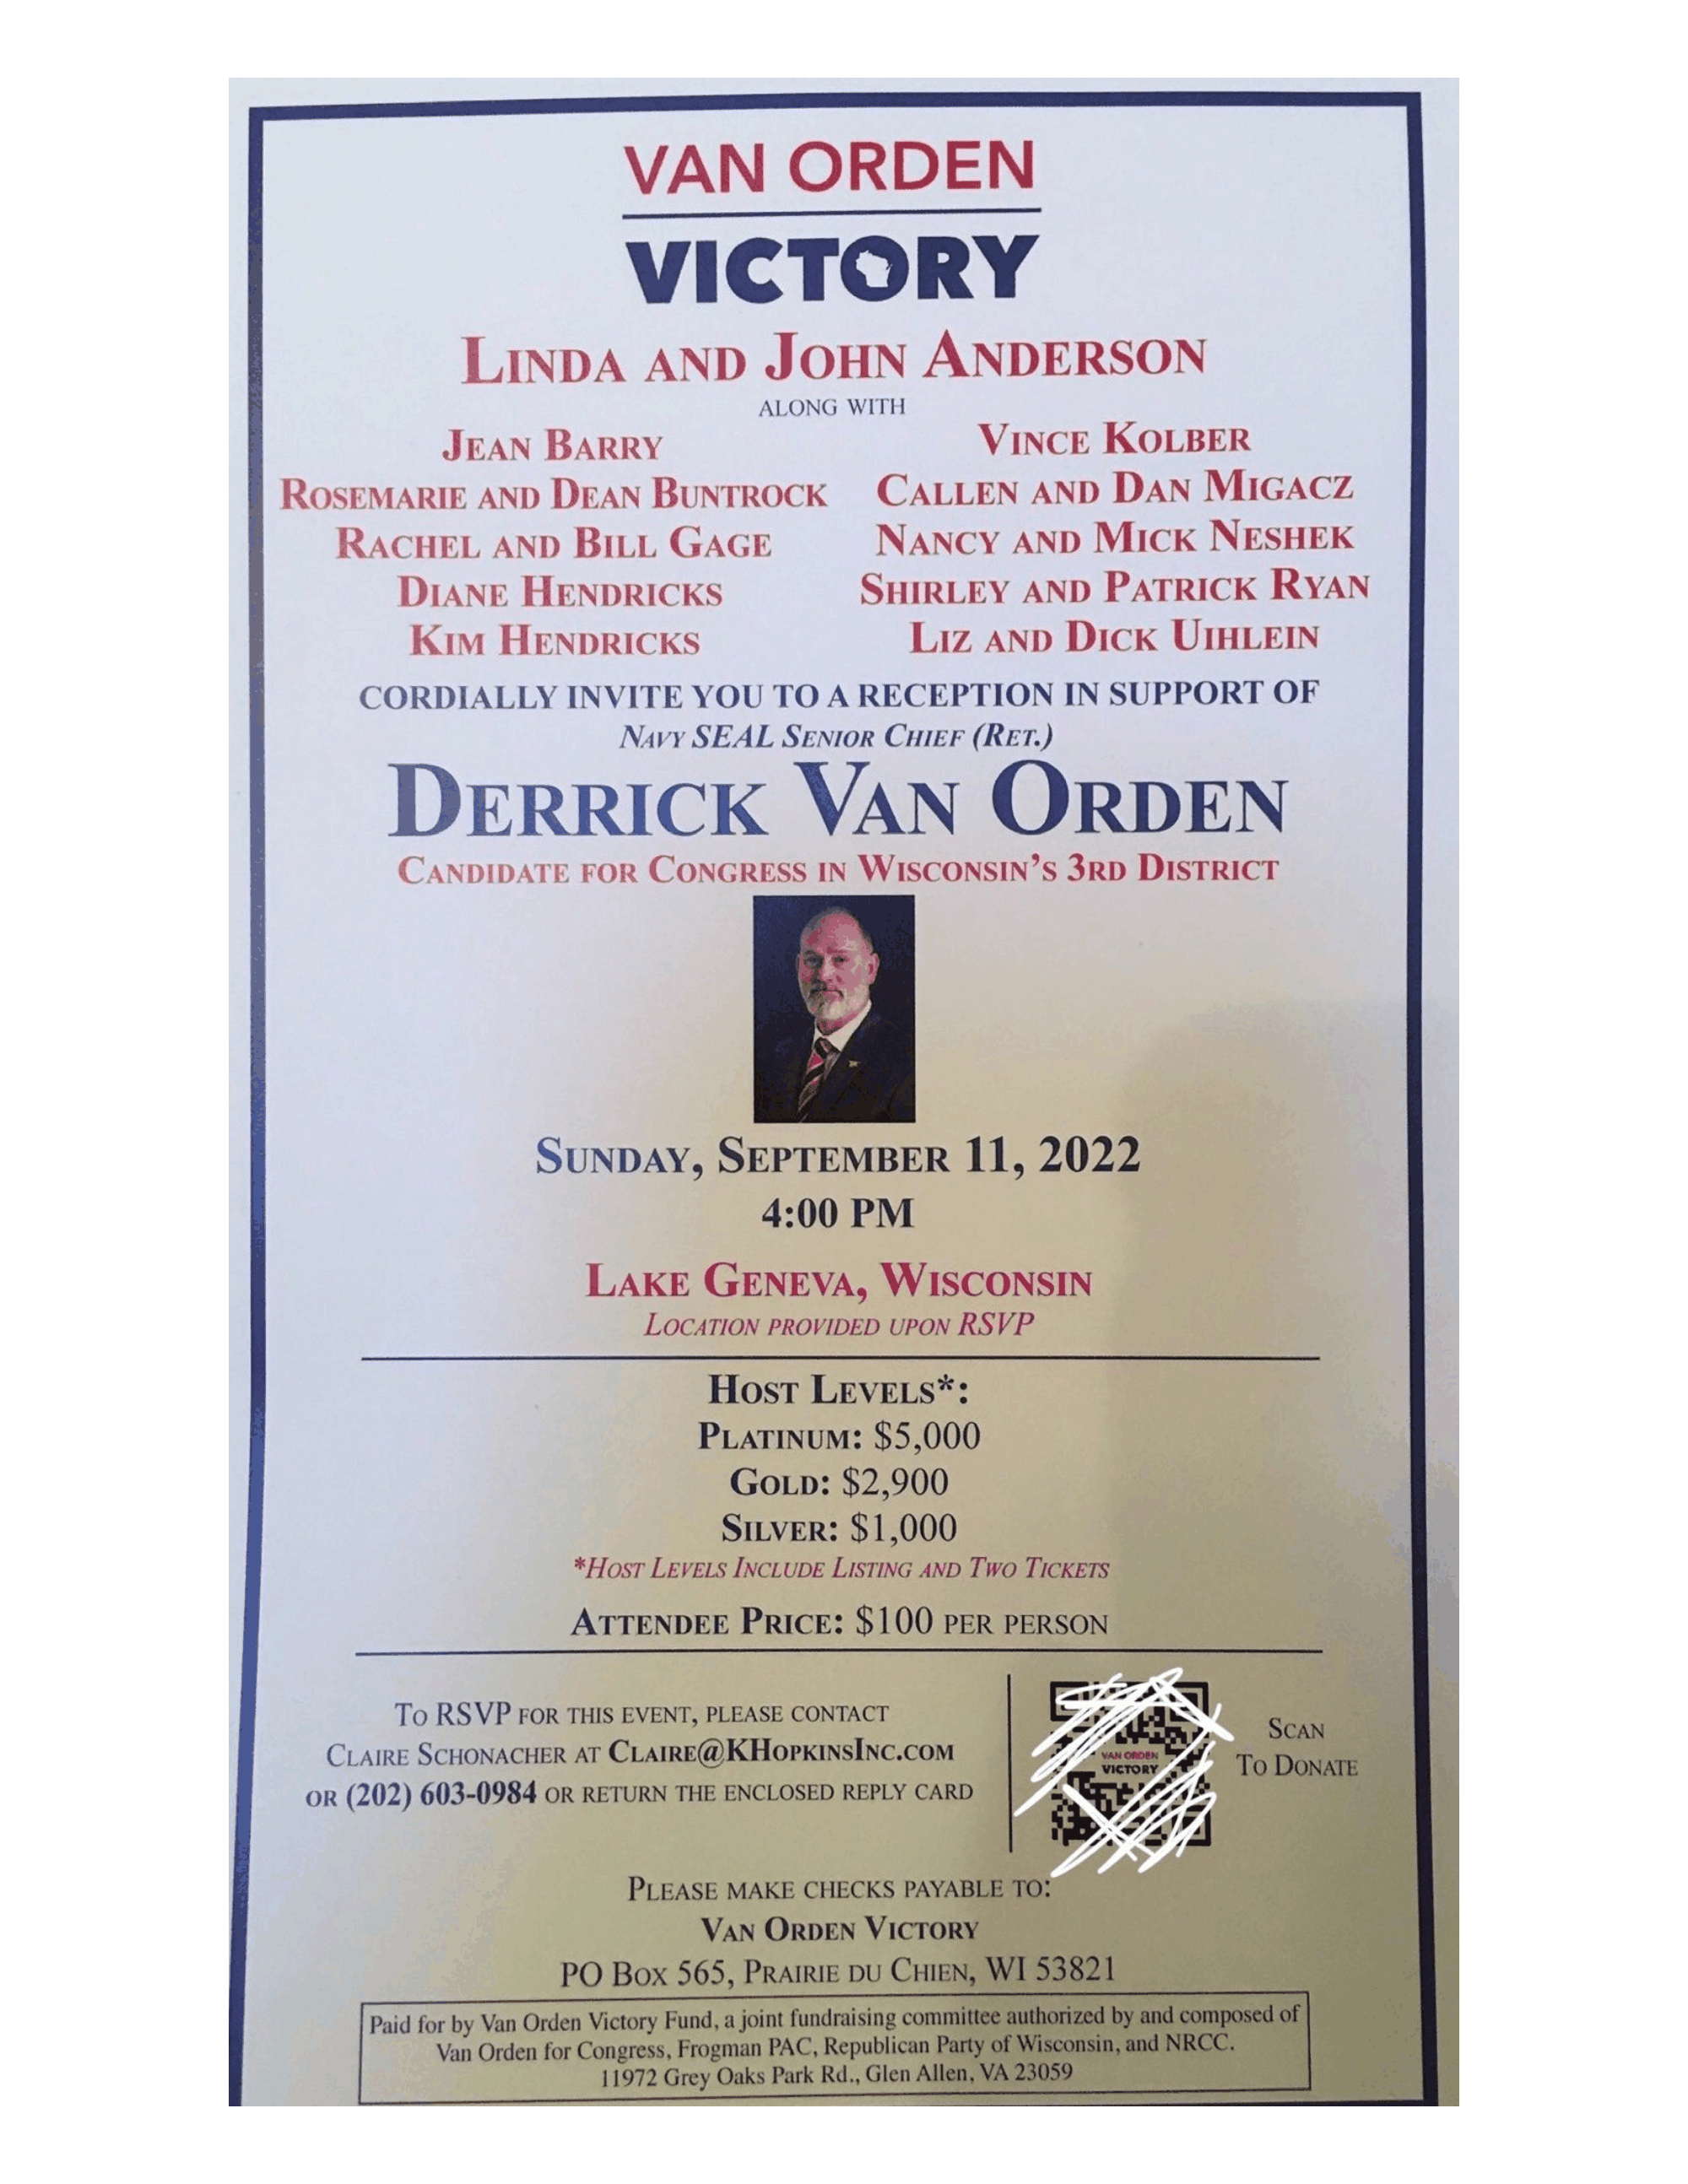 Page 1 of Fundraiser Invite for GOP Congressional Candidate in Wisconsin's 3rd District Derrick Van Orden, September 11, 2022